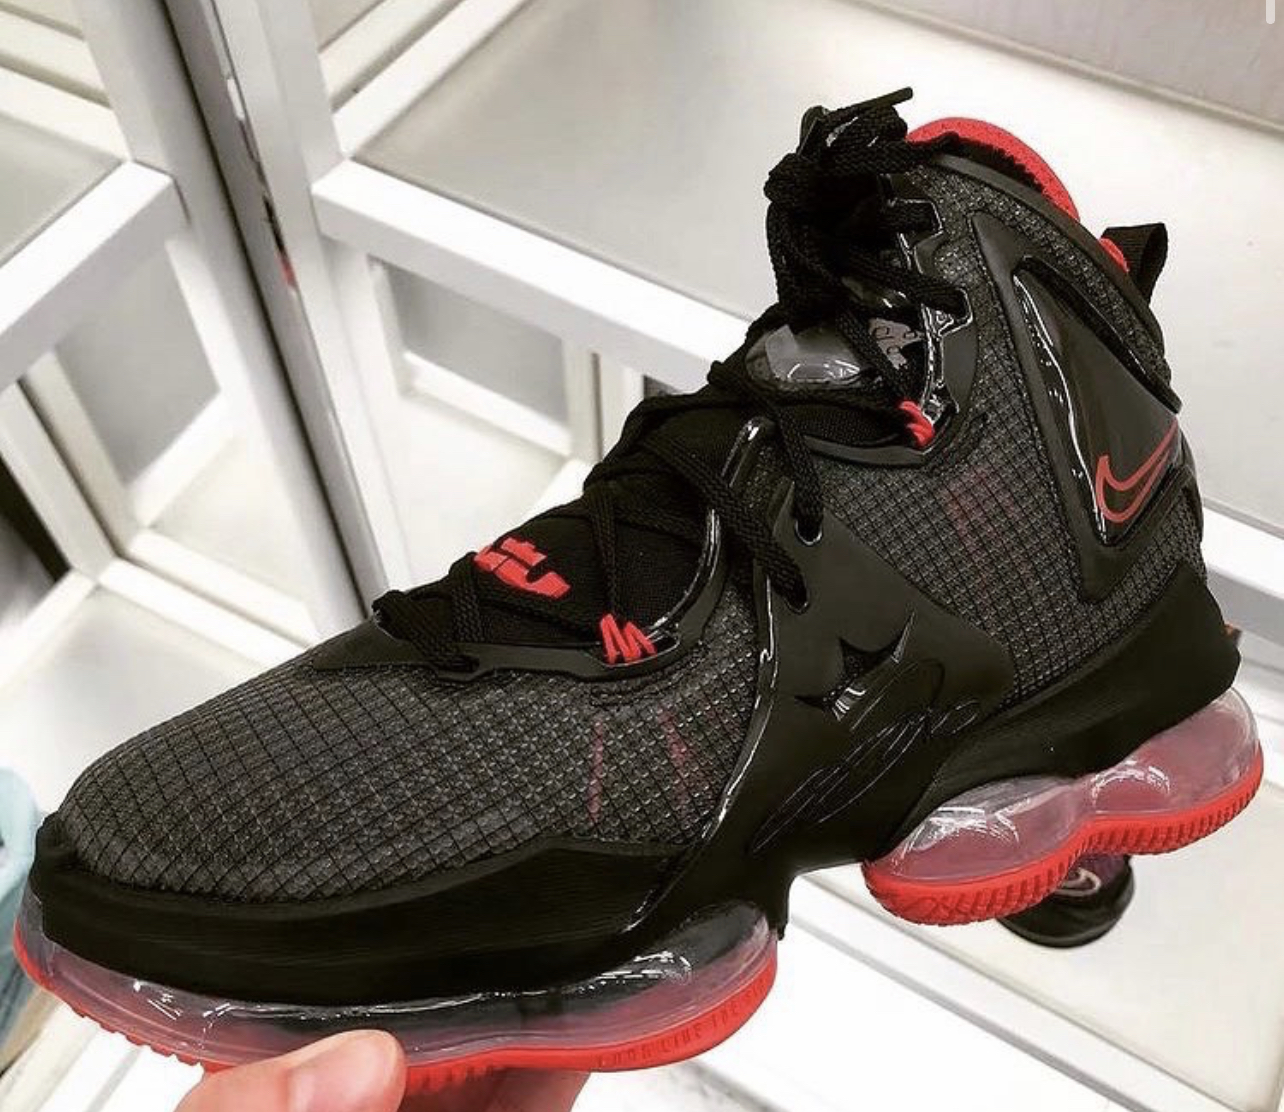 An in-hand look at the Black and Red Nike Lebron 19 | Sneaker Shop Talk